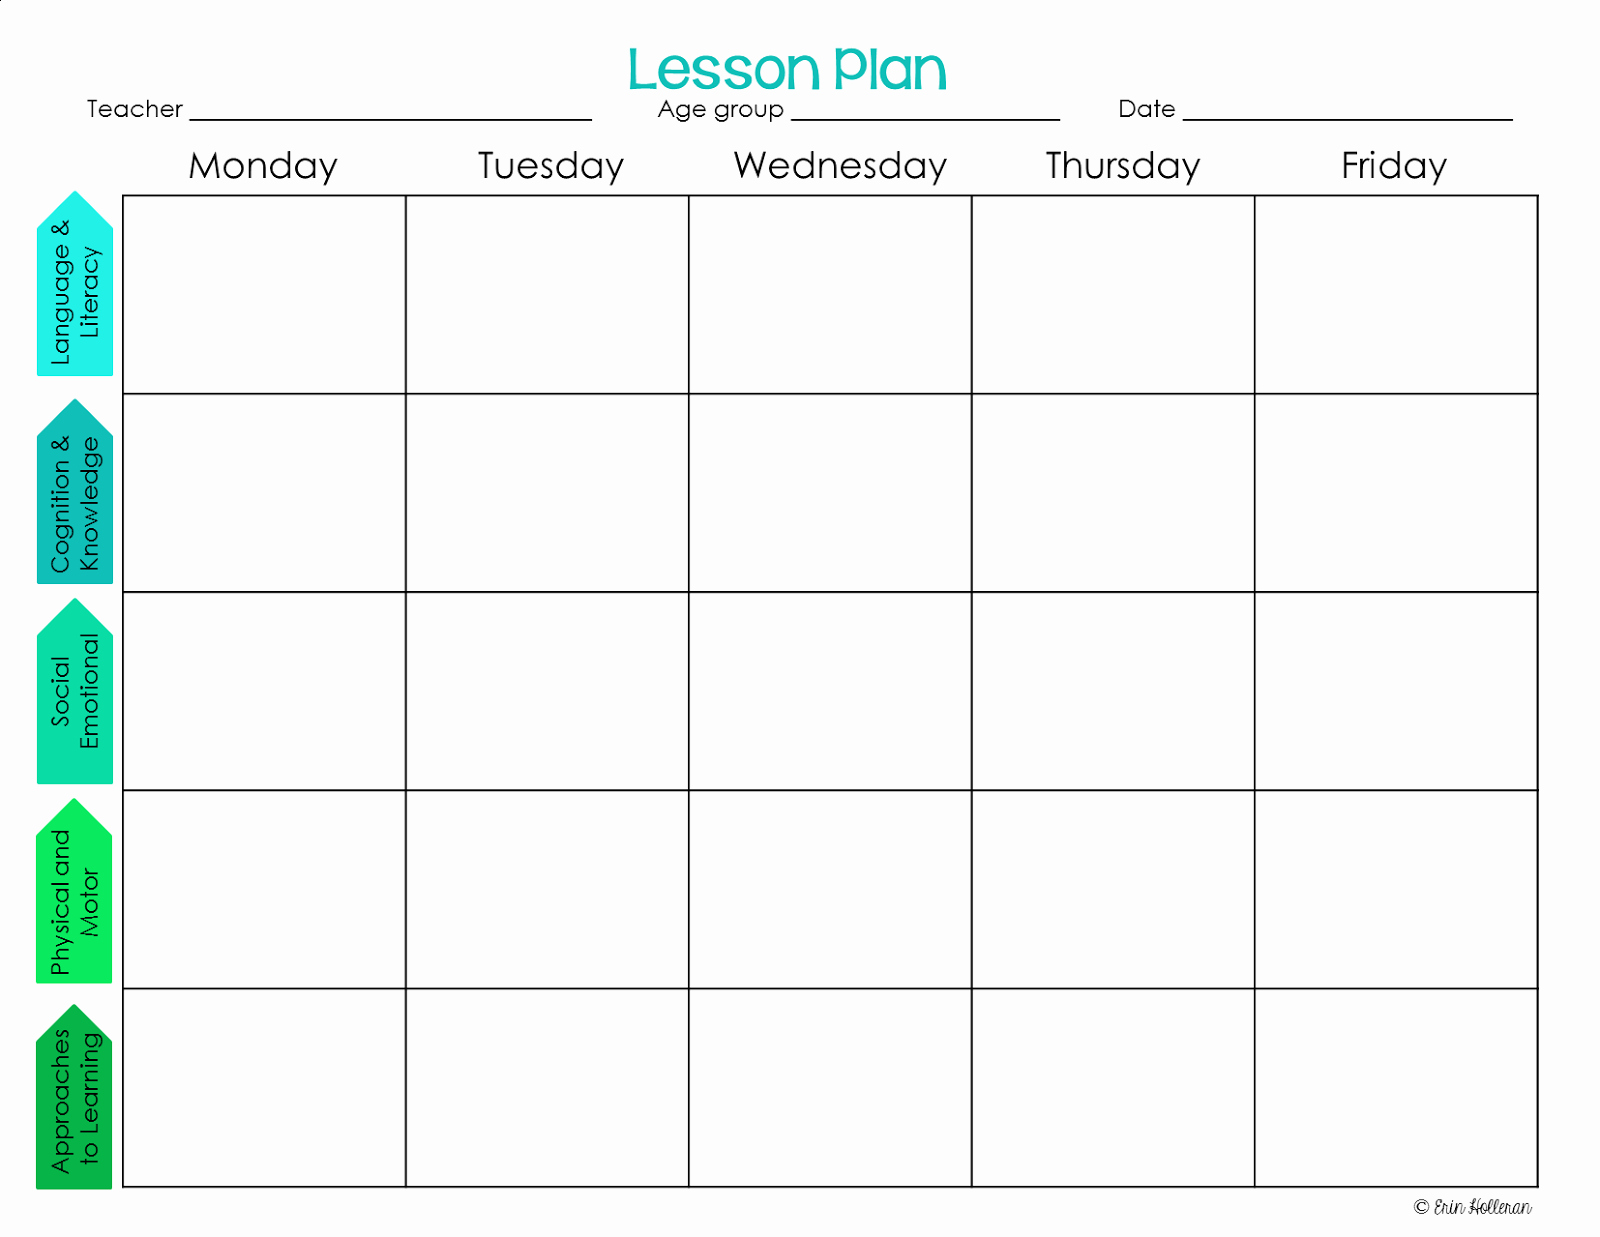 Lesson Plan Template Preschool Awesome Preschool Ponderings Make Your Lesson Plans Work for You